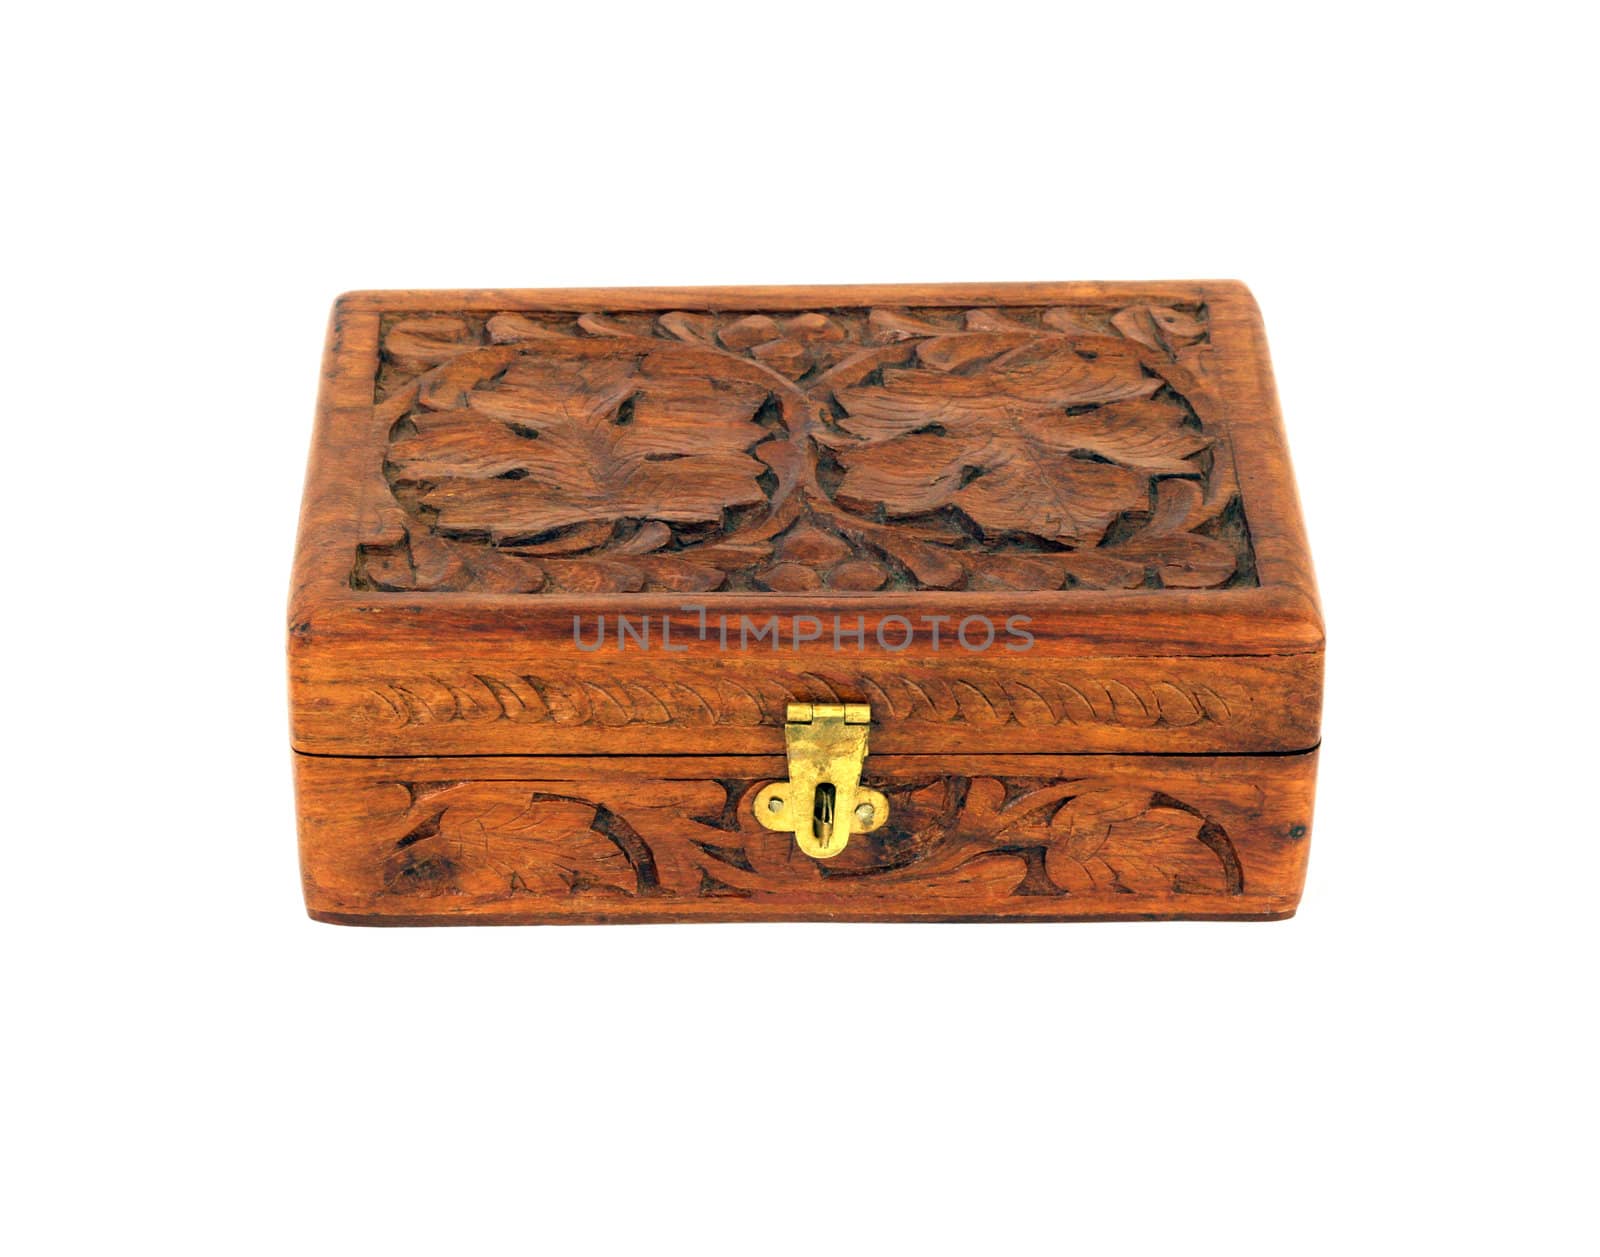 Engraved wooden box isolated in white